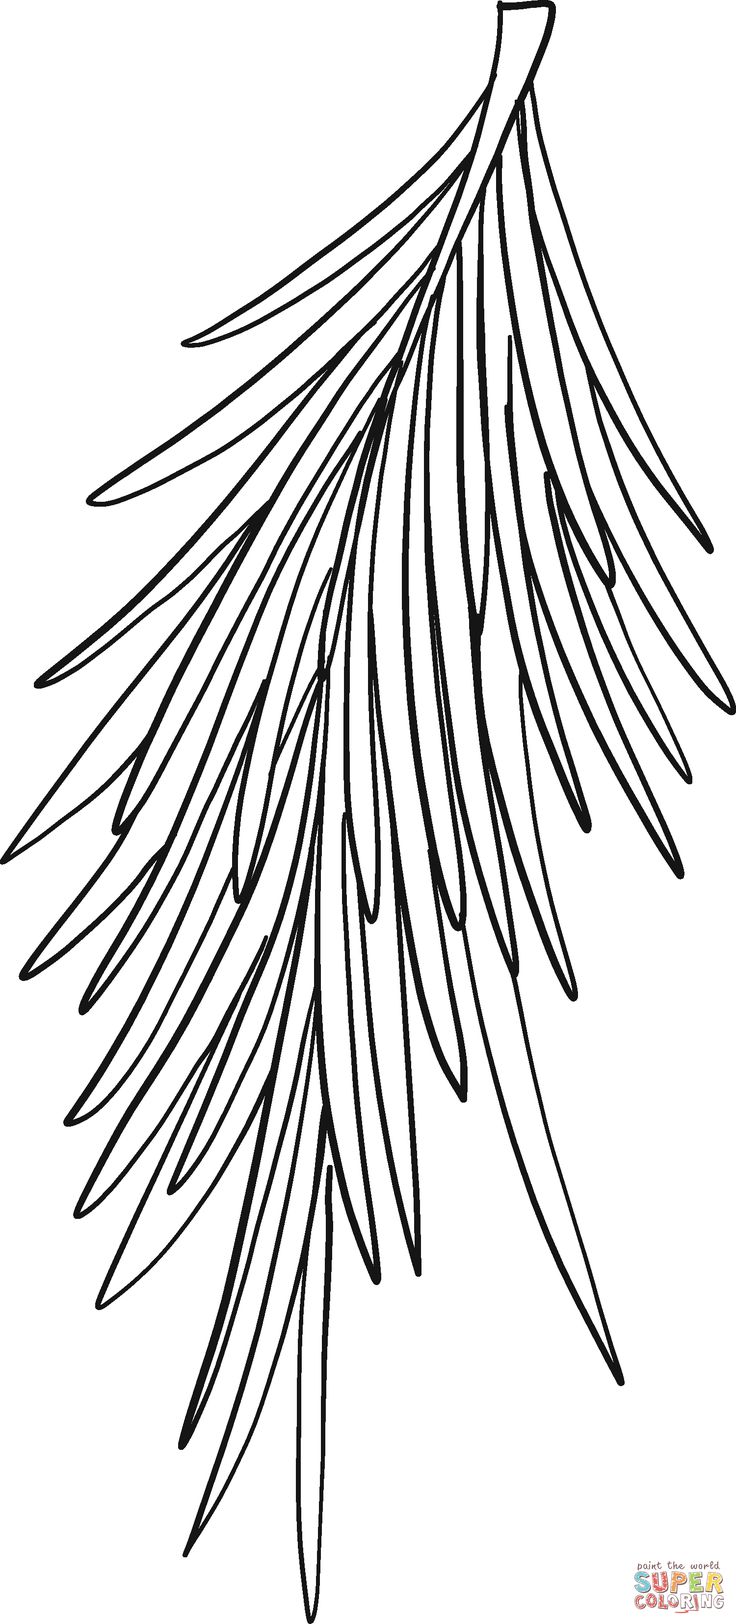 Evergreen tree branch coloring page free printable coloring pages tree line drawing tree branch art tree outline